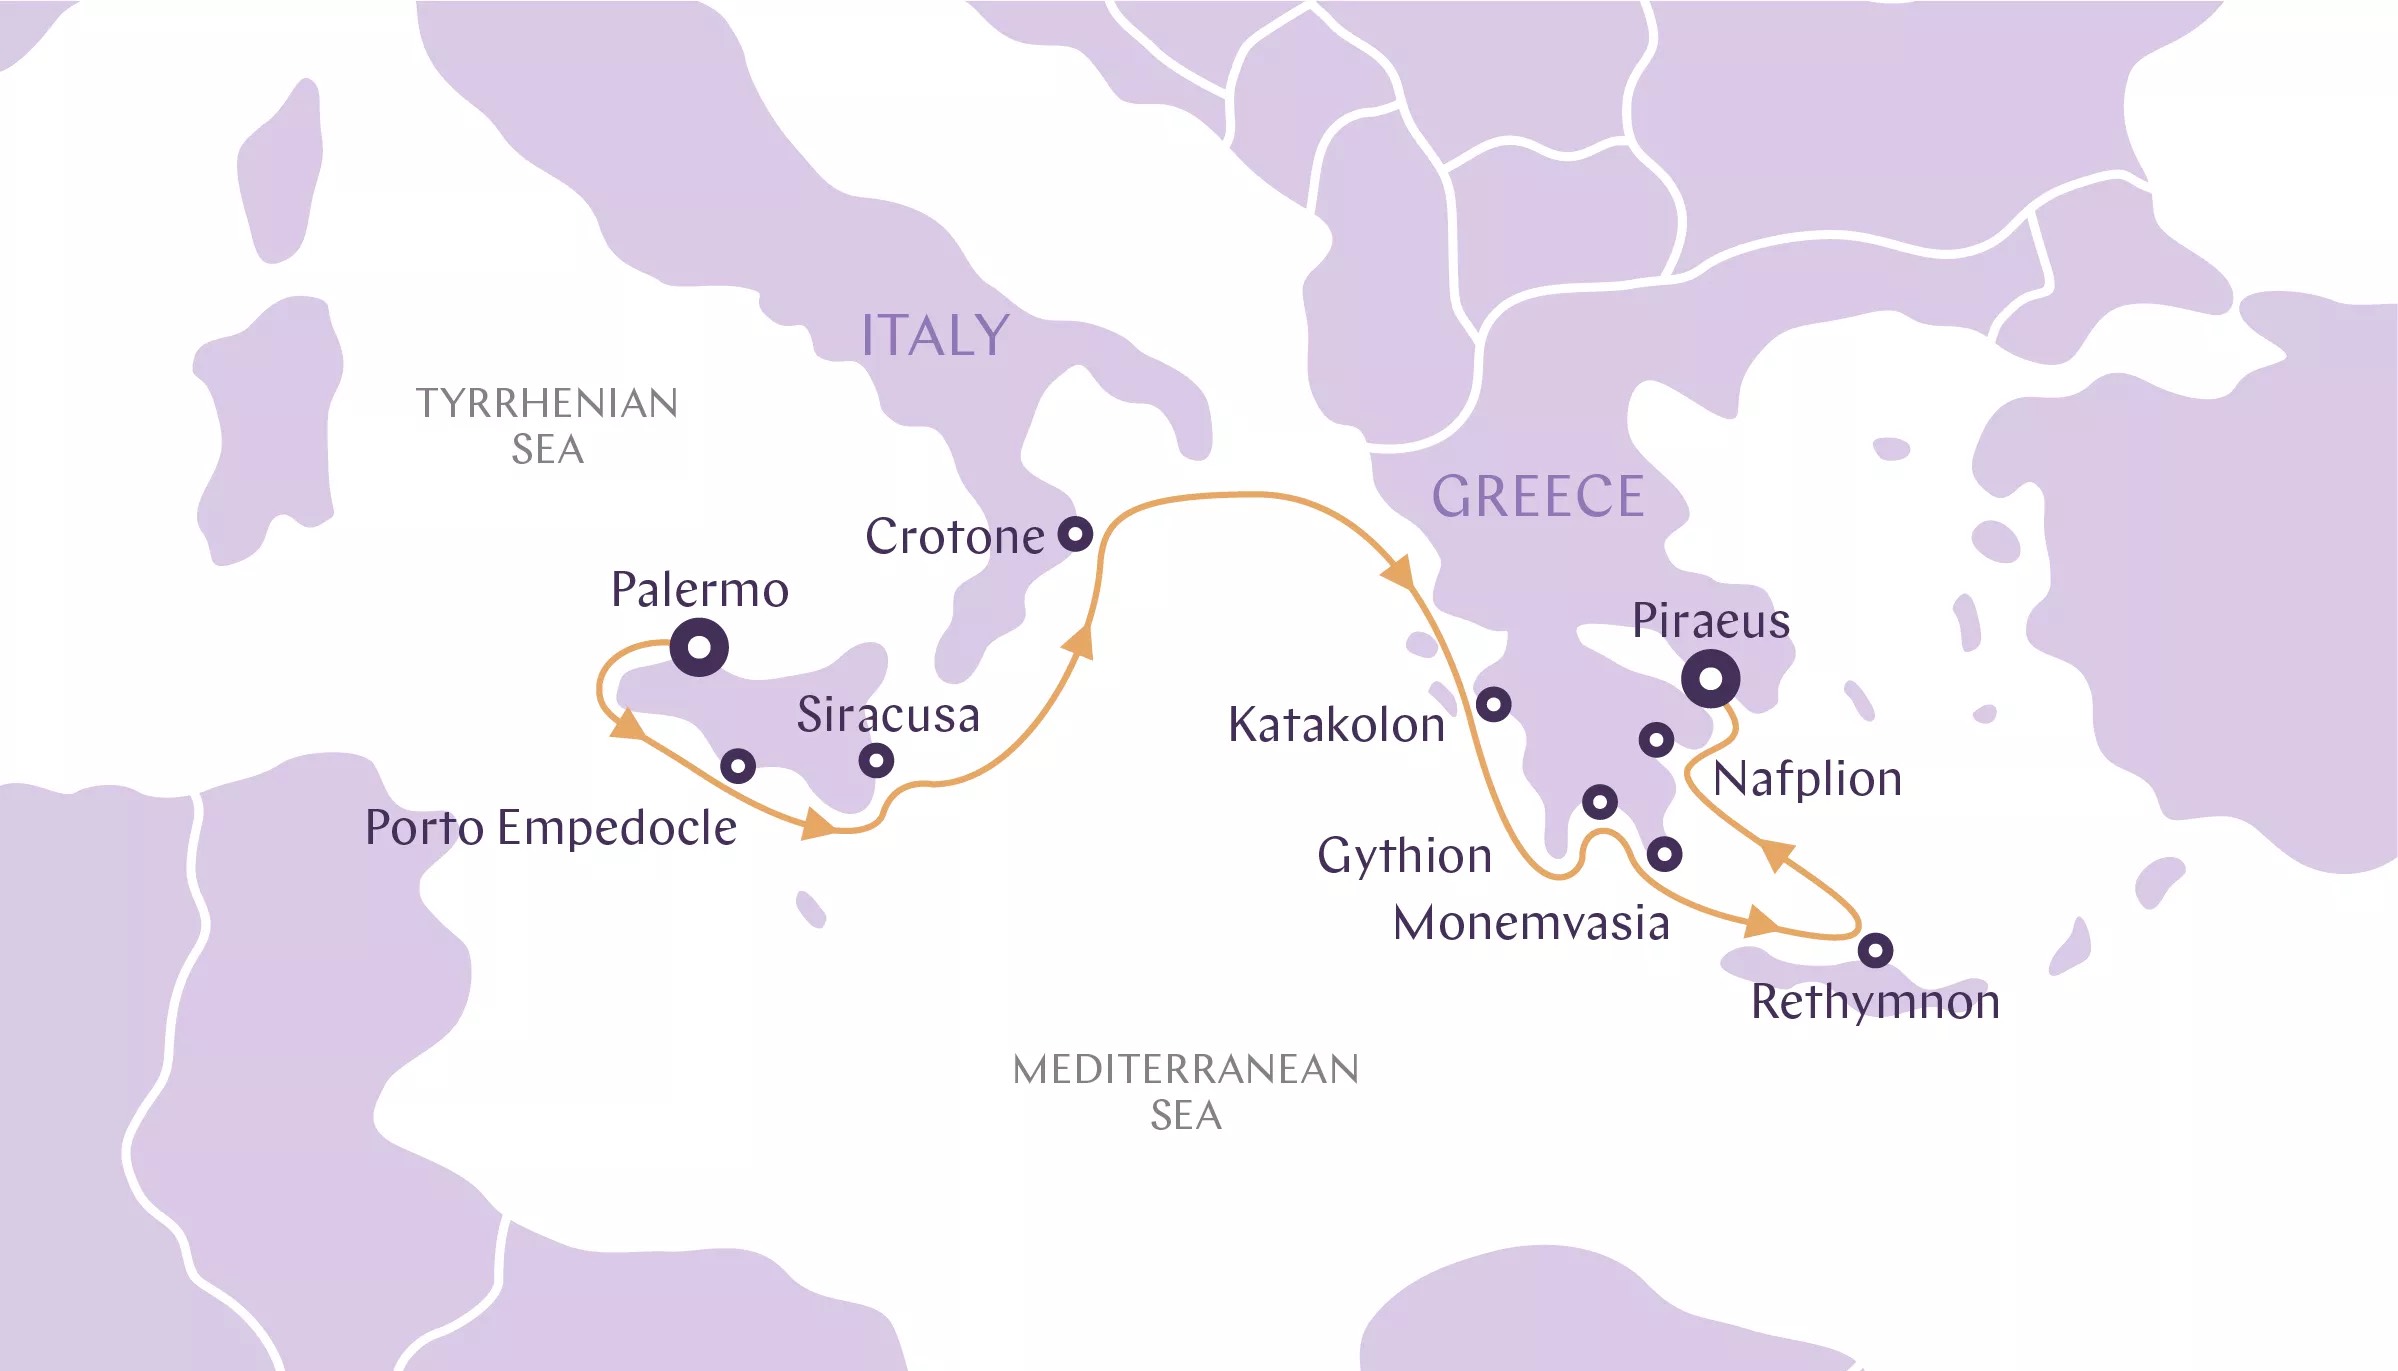 Cradles of the Mediterranean route map